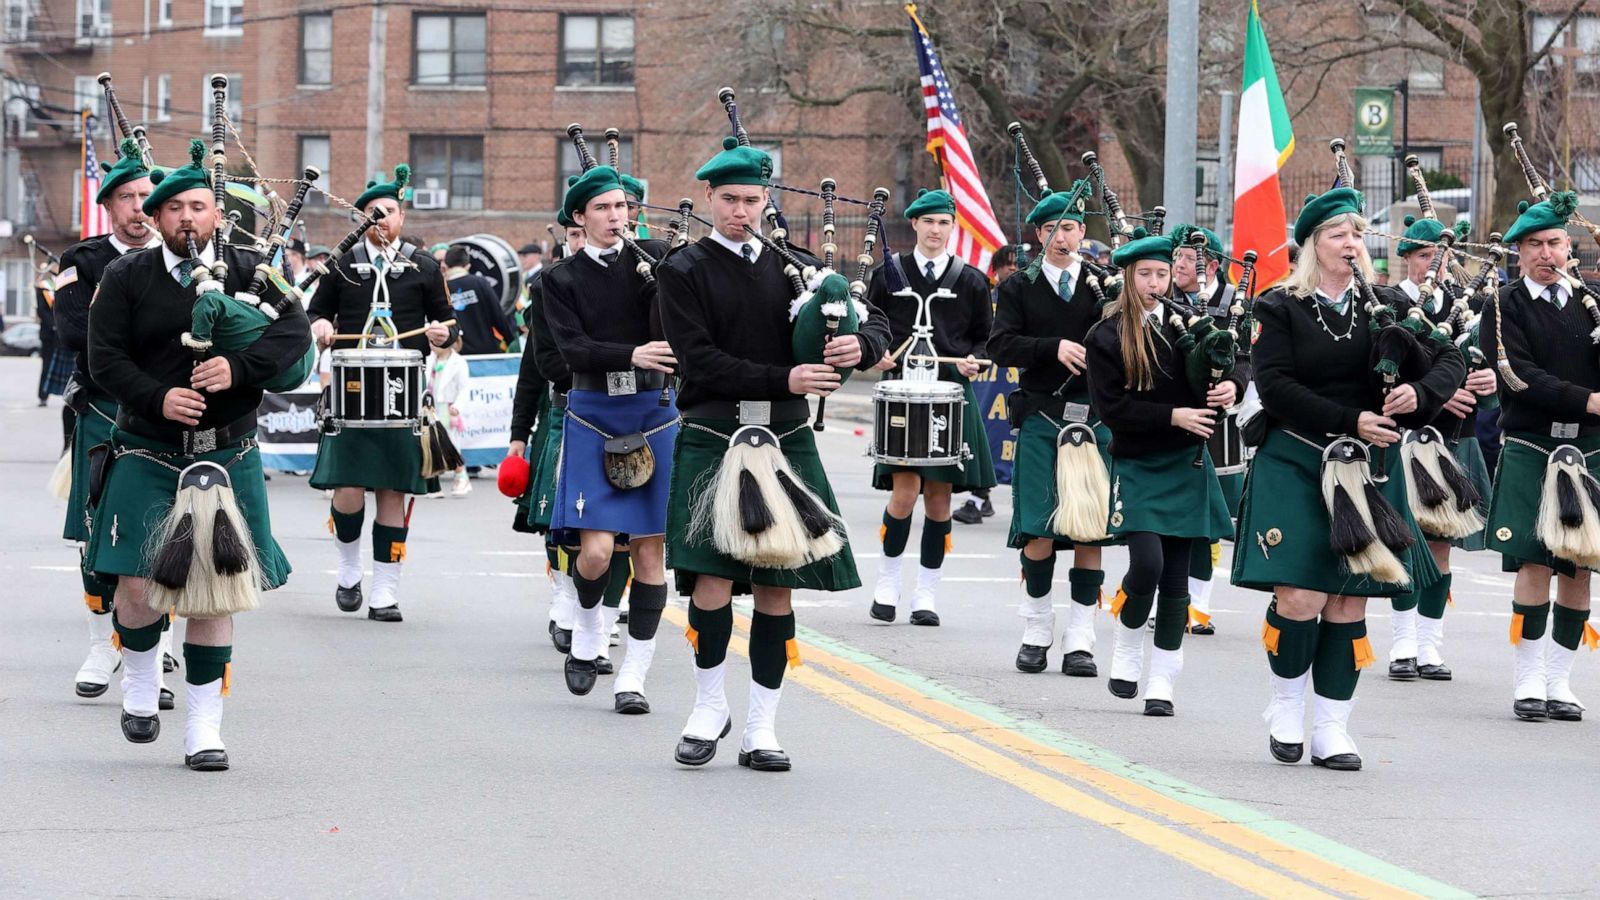 Yonkers man accused of threatening to kill officers during St. Patrick’s Day parade